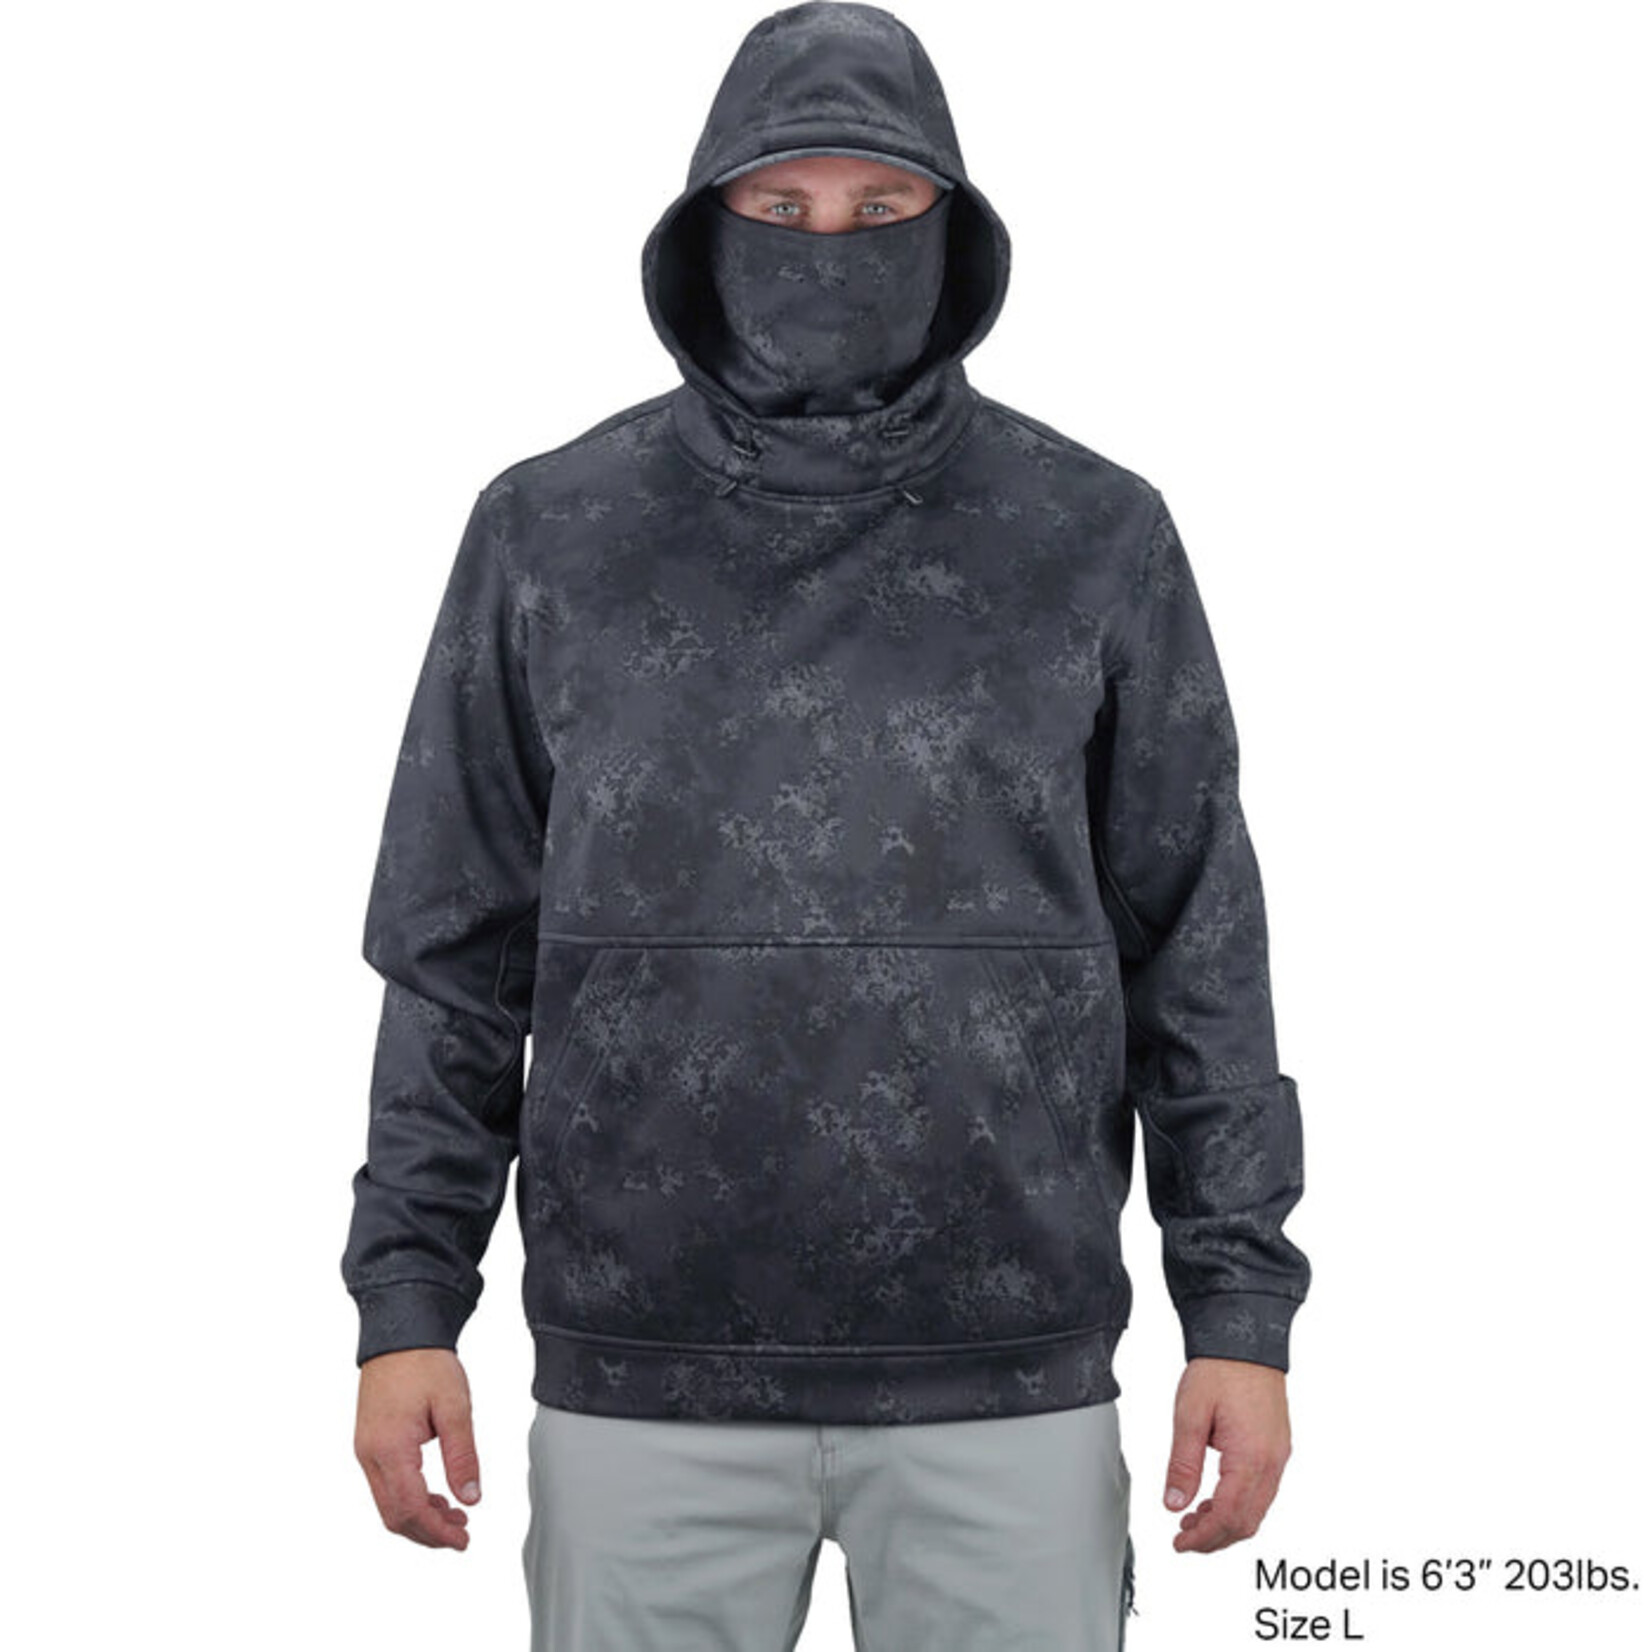 AFTCO Reaper Tacticle Hoodie